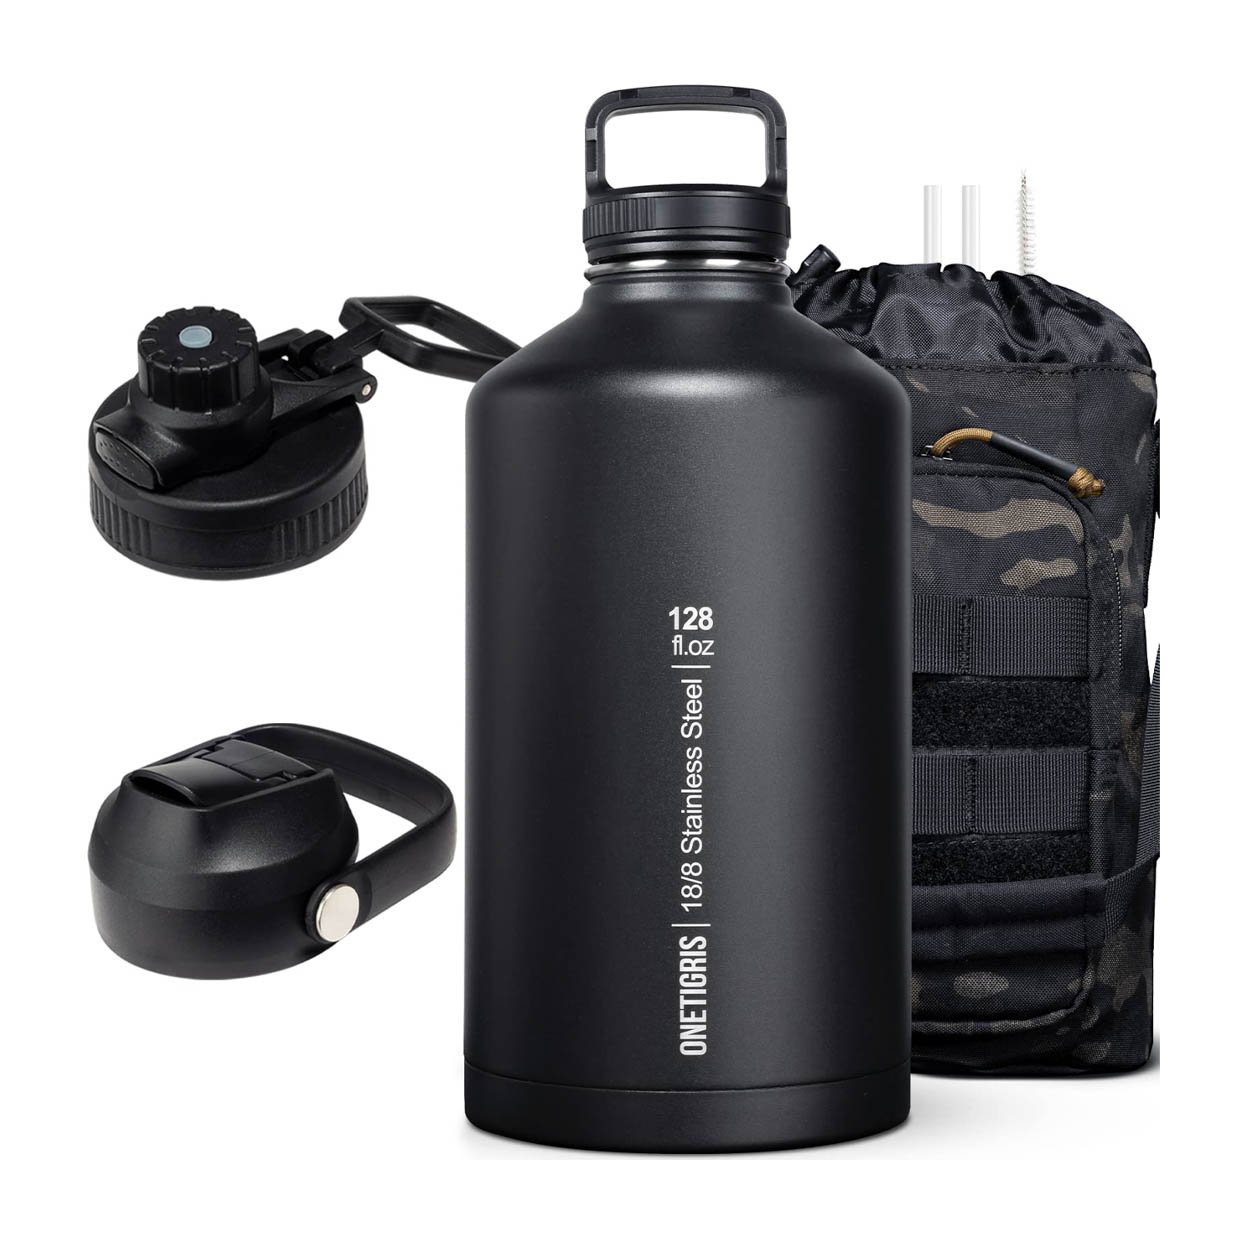 Water Bottle Insulated 1 Gallon Stainless Steel Water Bottle with